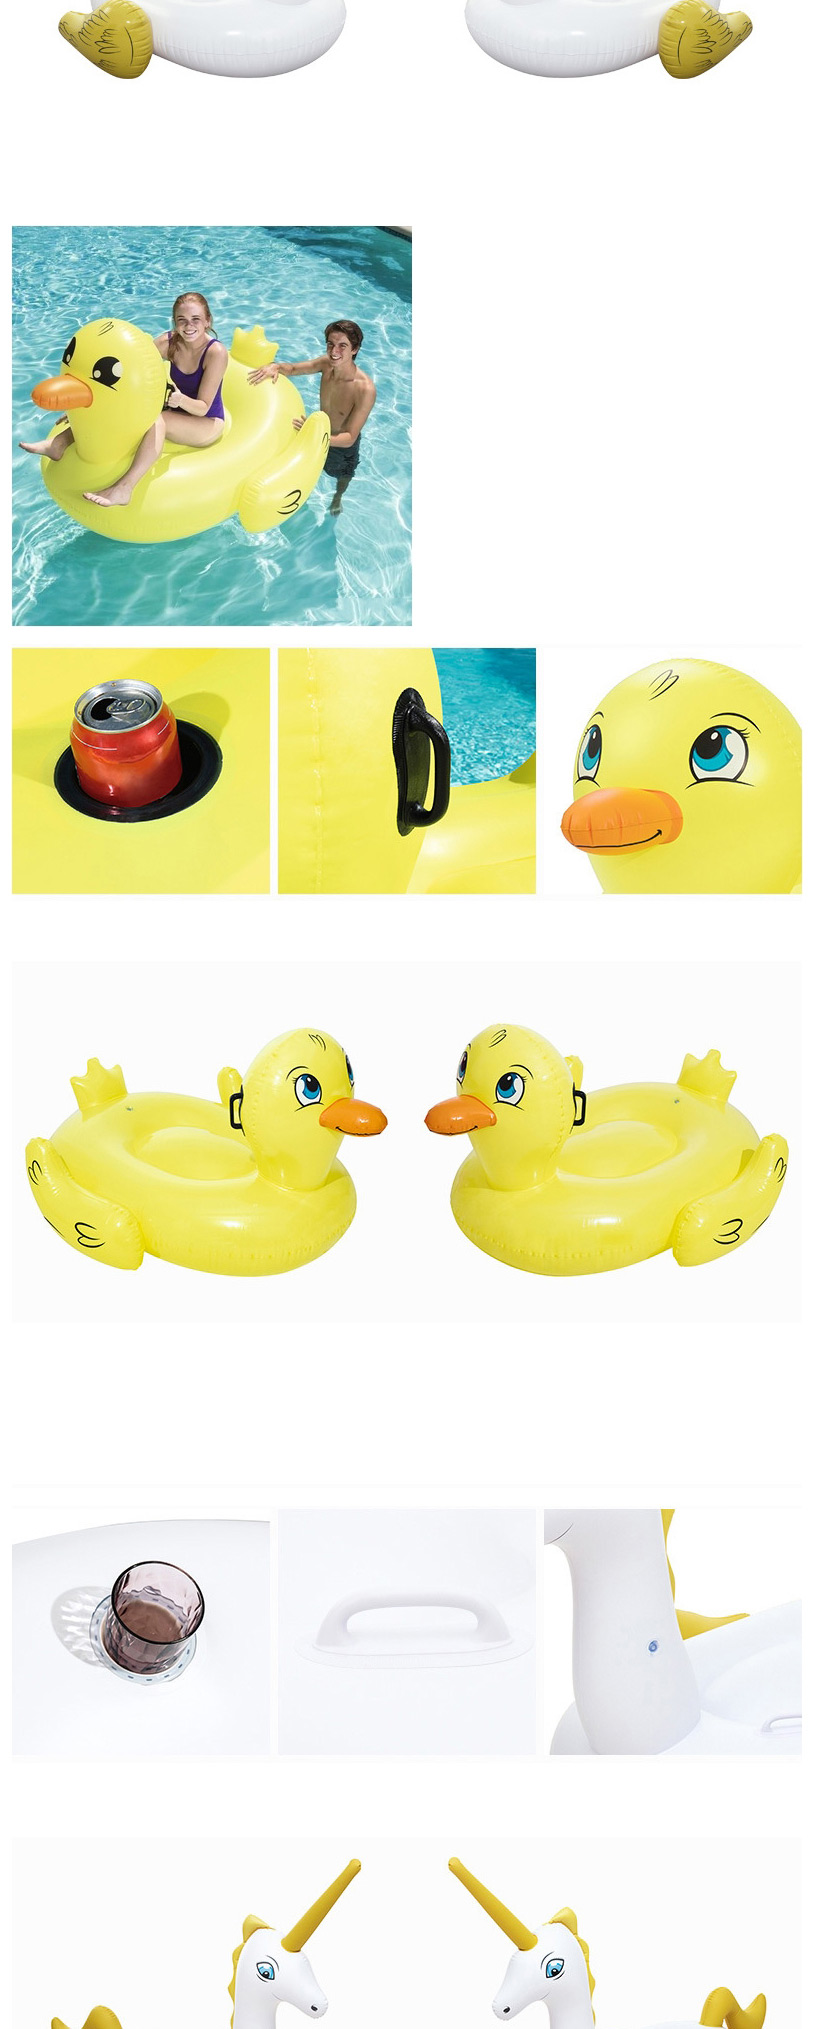 Fashion Big Yellow Duck Water Animal Inflatable Mount Toy Floating Bed,Swim Rings